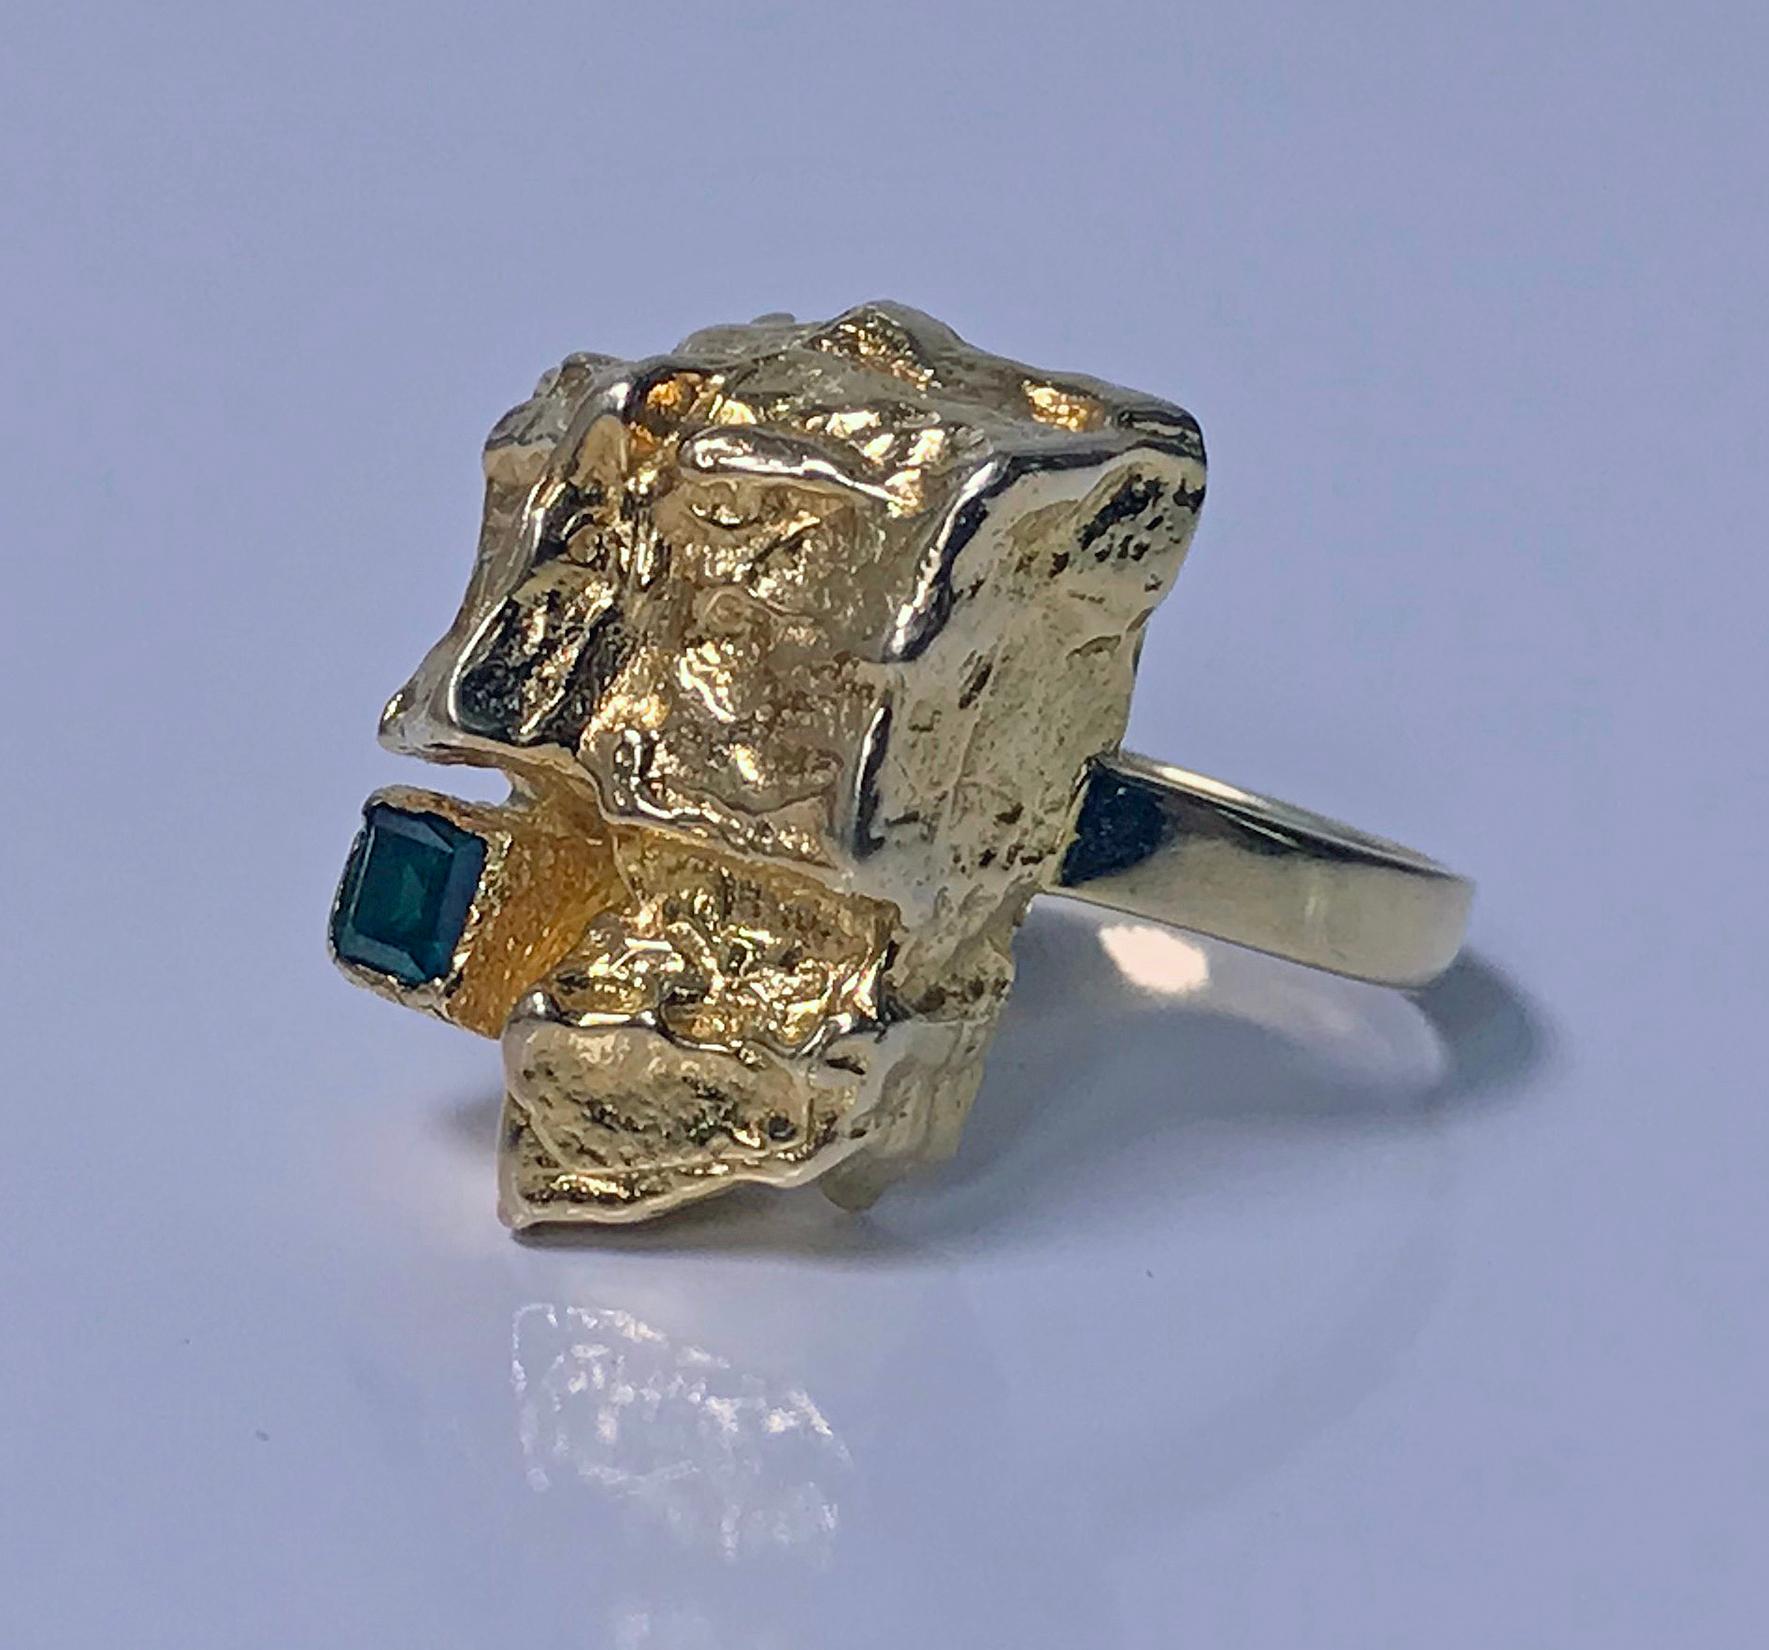 1970’s Scandinavian Gold and Emerald abstract Ring. The Ring of large textured abstract gold nugget form set in the corner with a slightly bluish Green square cut emerald, approximately 0.30 ct, approximately VS clarity (type 111), plain polished